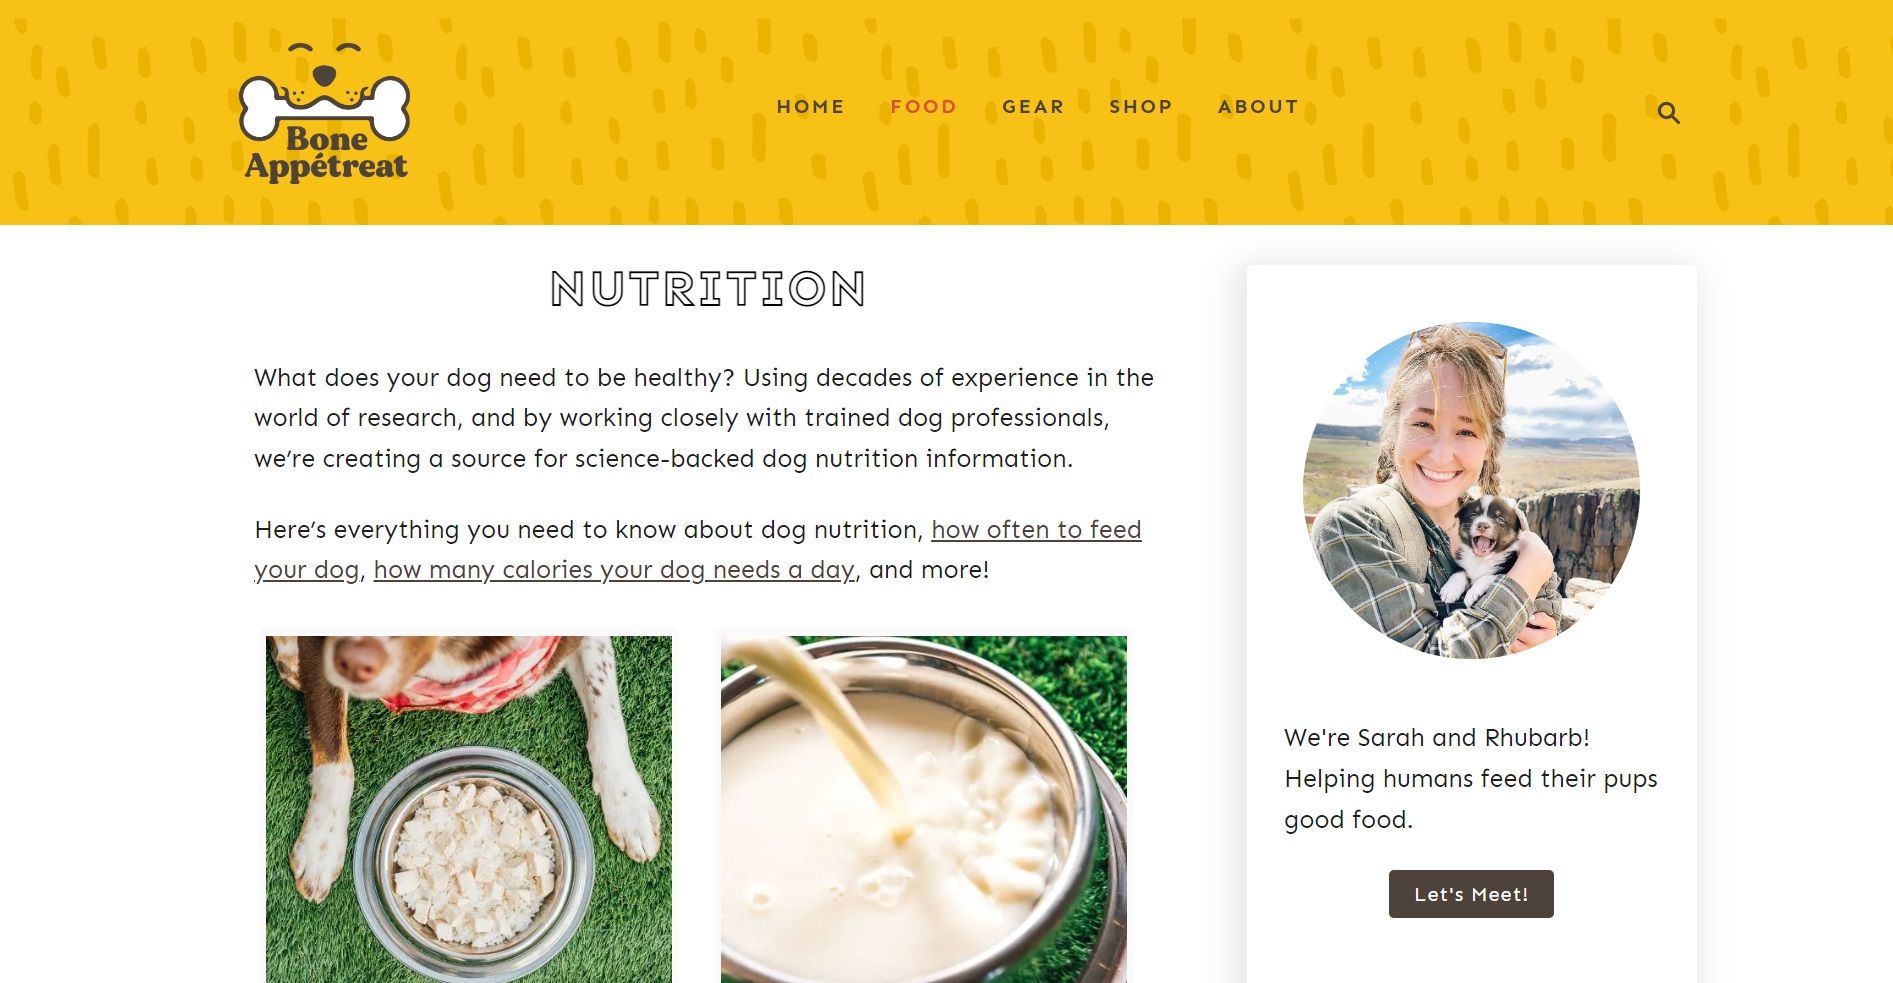 Nutrition section on Bone Appetreat